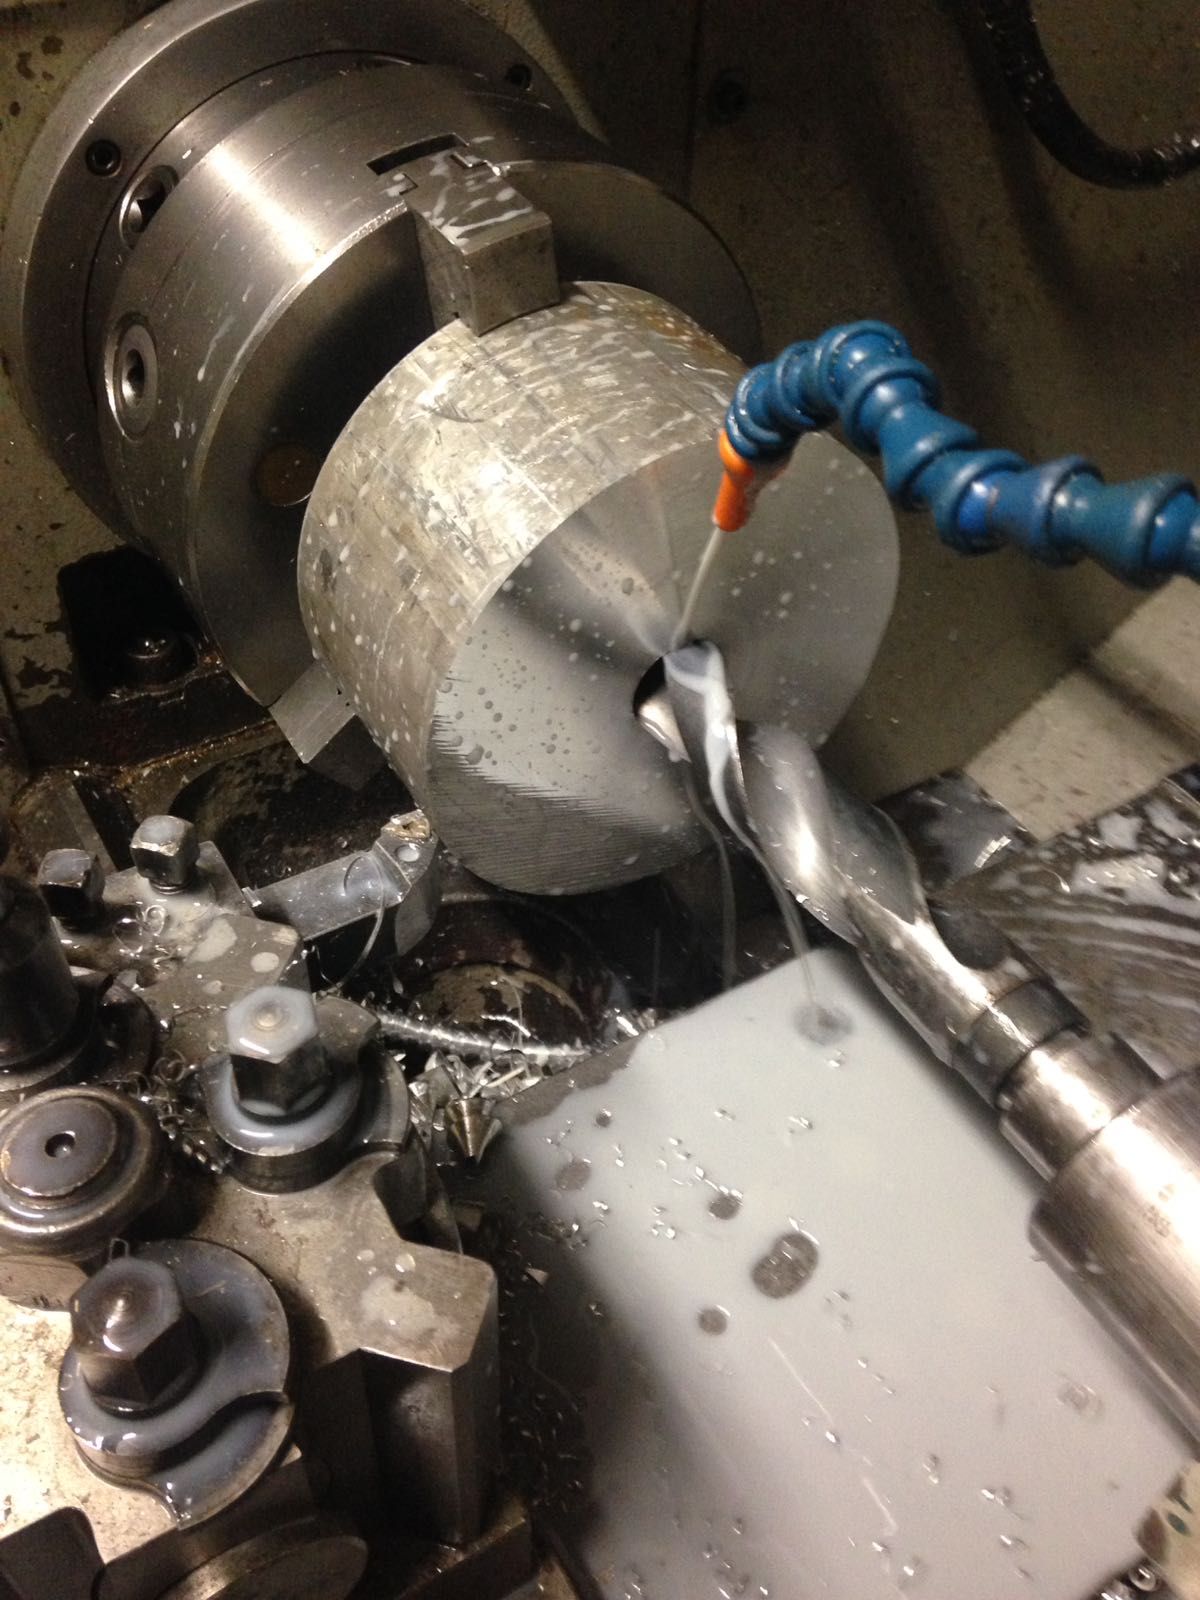 A picture of our CNC drill in action. In this photo it is drilling stainless steel